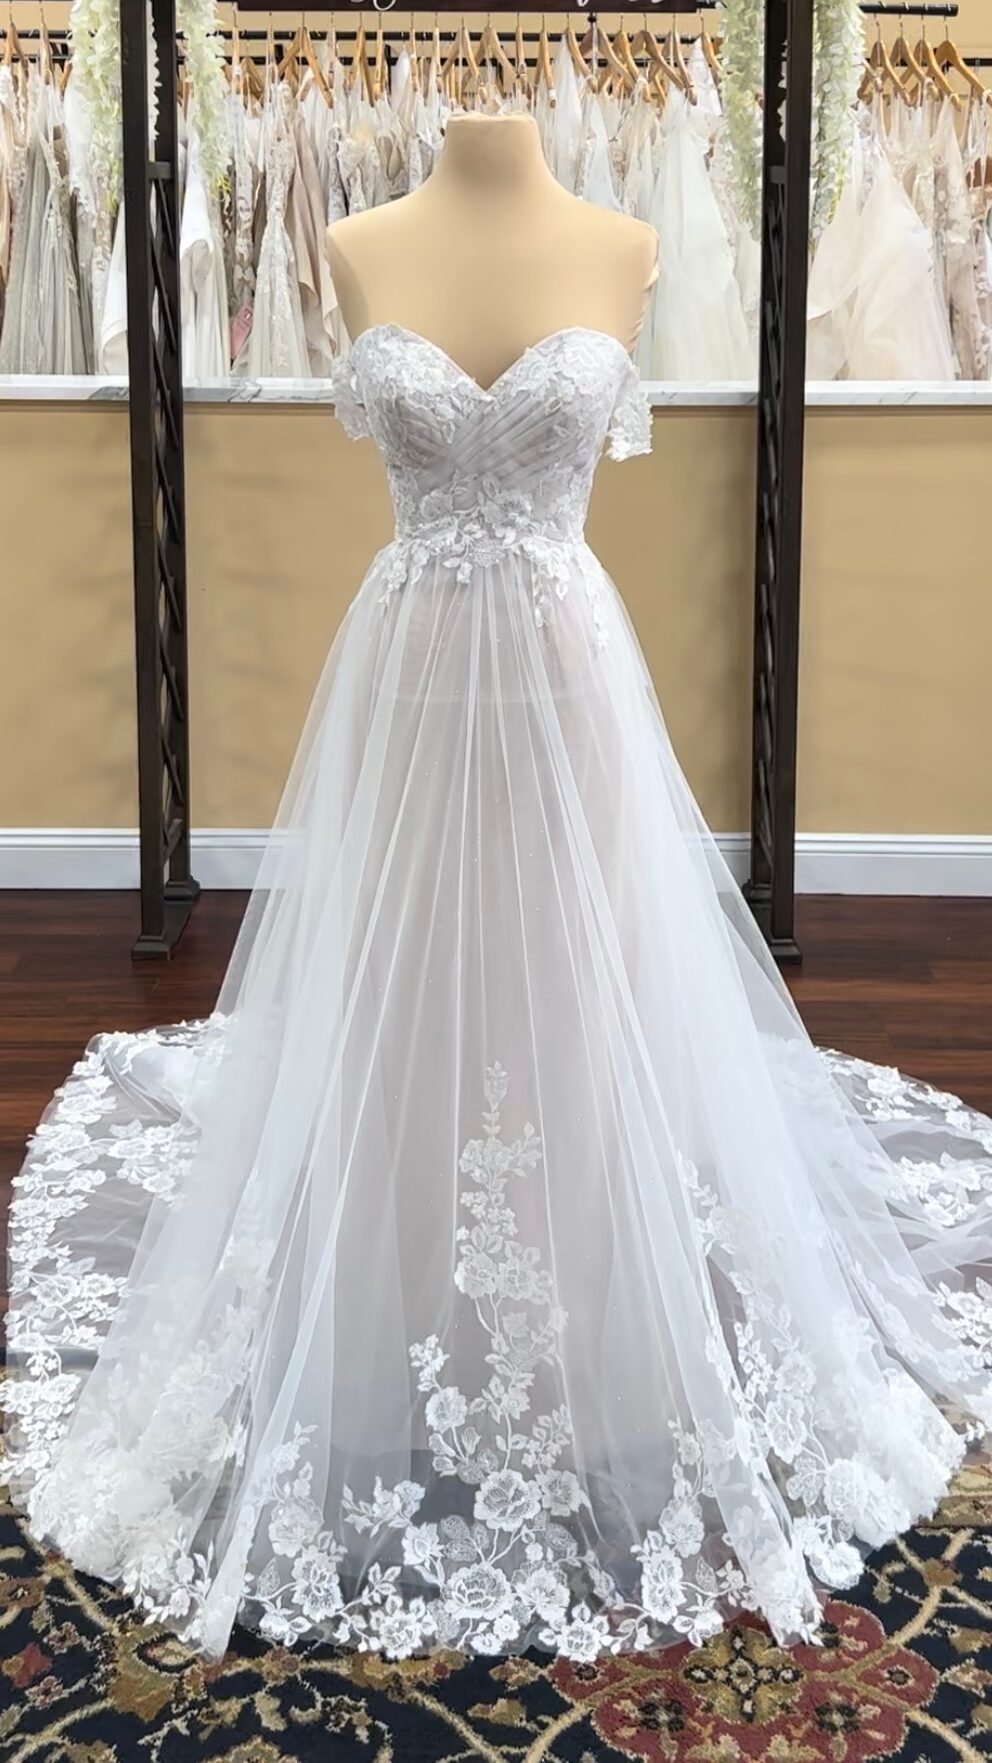 A-line wedding dress for apple shaped body type. Ruched sweetheart bodice with applique overlays, off the shoulder sleeves and  light tulle skirt with rose florets at the bottom.